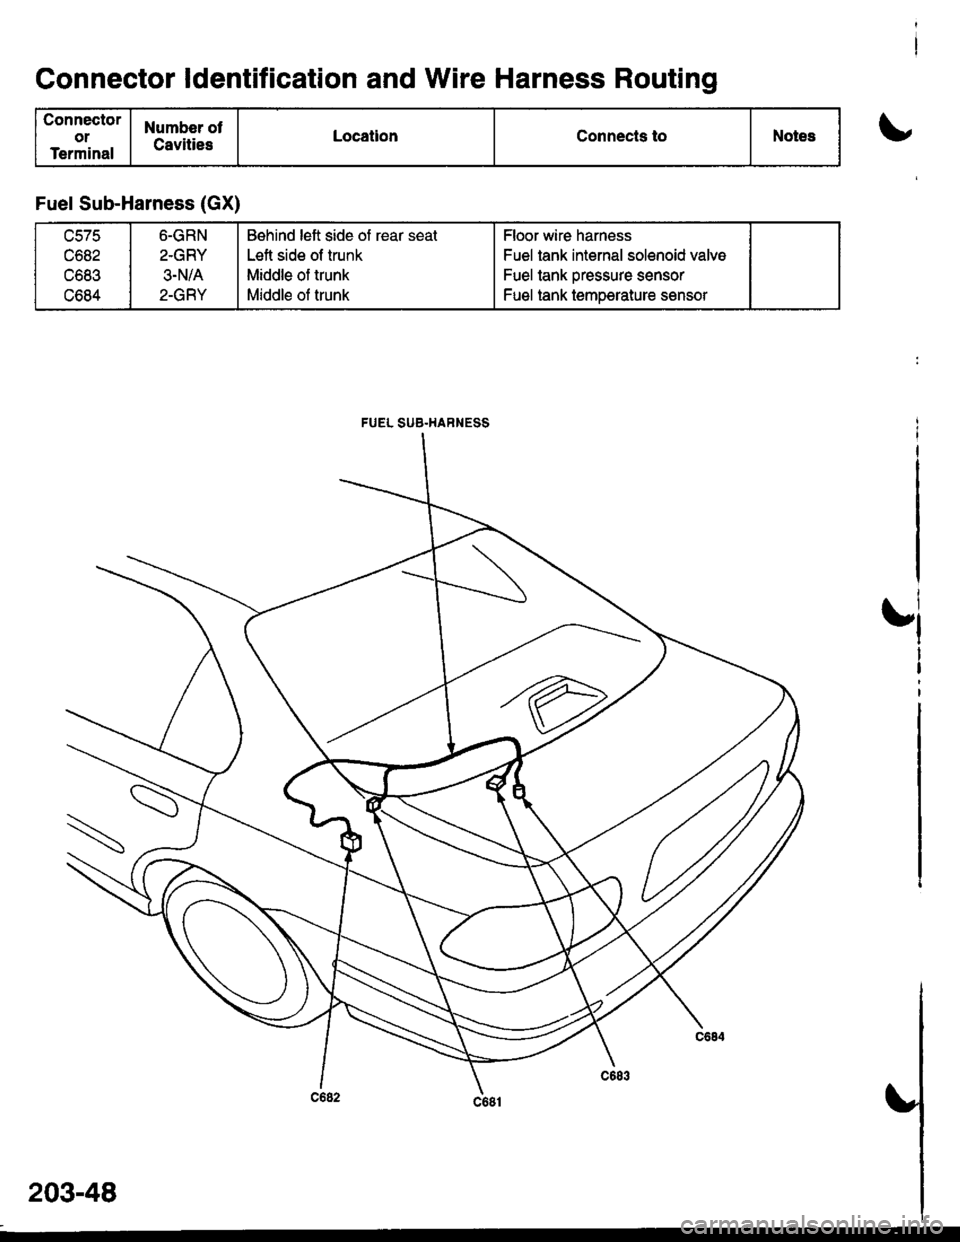 HONDA CIVIC 1997 6.G Workshop Manual Connector ldentification and Wire Harness Routing
Connector
ot
Terminal
Numbor ot
CavitiesLocationConnects toNotest
t
Fuel Sub-Harness (GX)
uc/c
c682
c683
c684
6-GRN
2-GRY
3-N/A
2-GRY
Behind left side